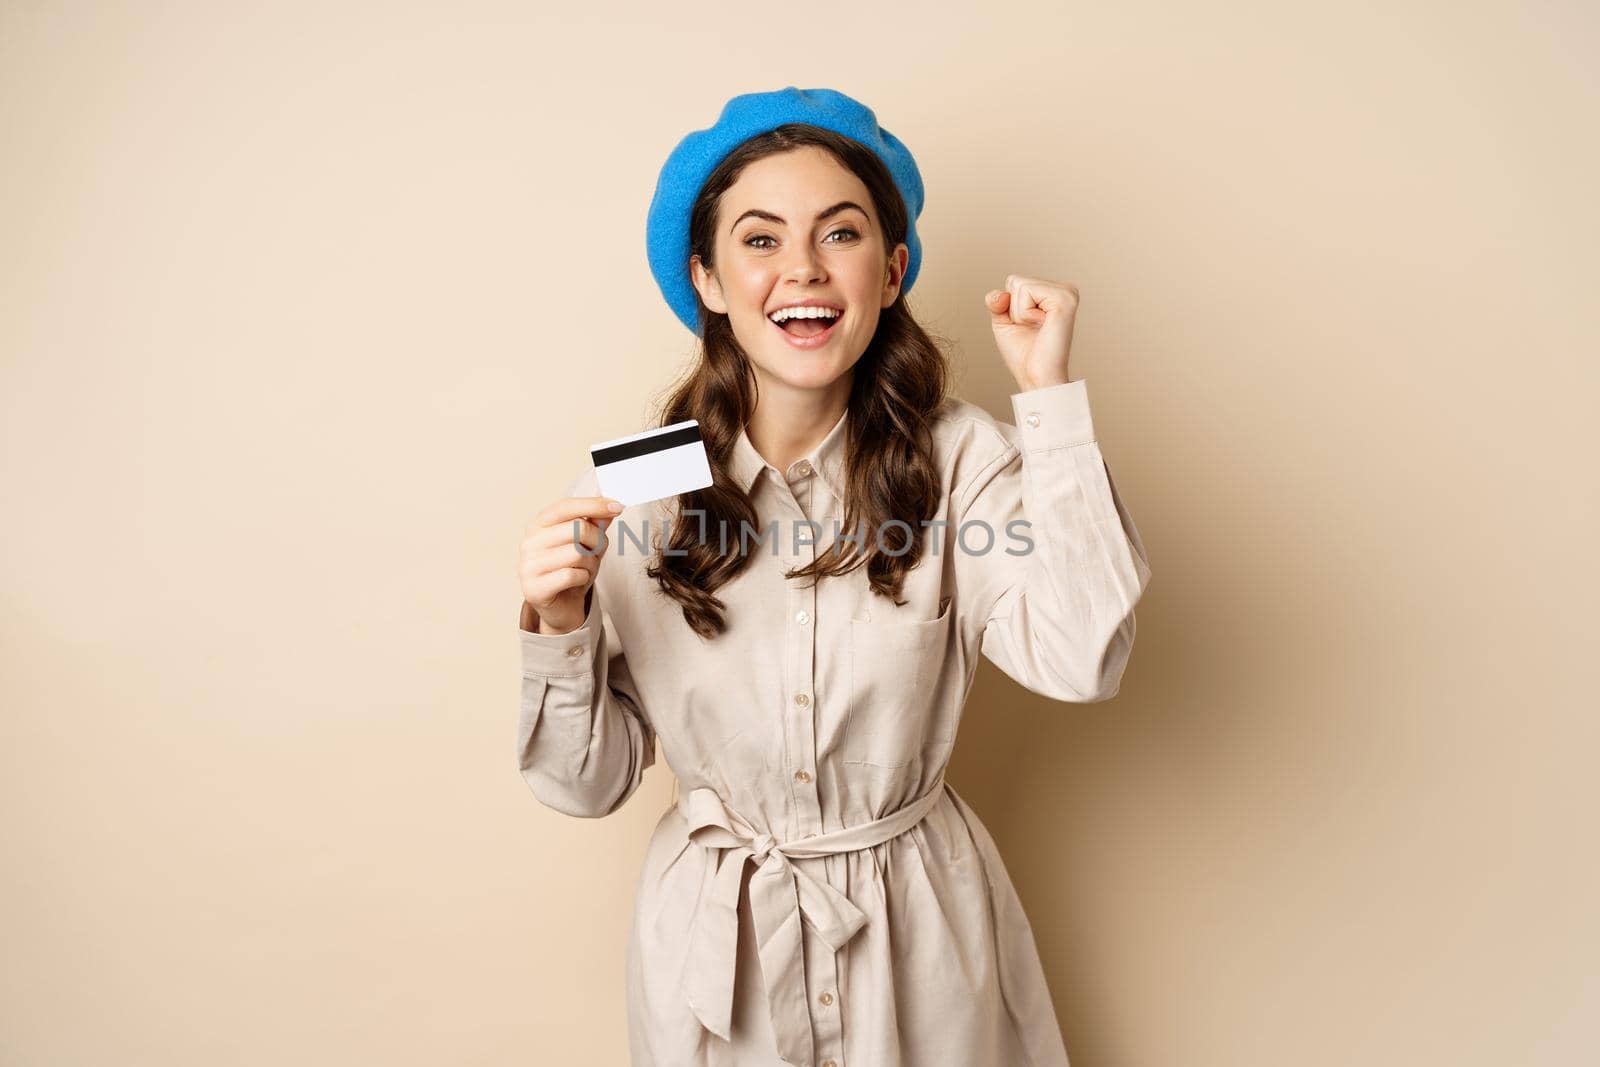 Enthusiastic young woman yearning to go shopping, dancing with credit card and celebrating, laughing and smiling.